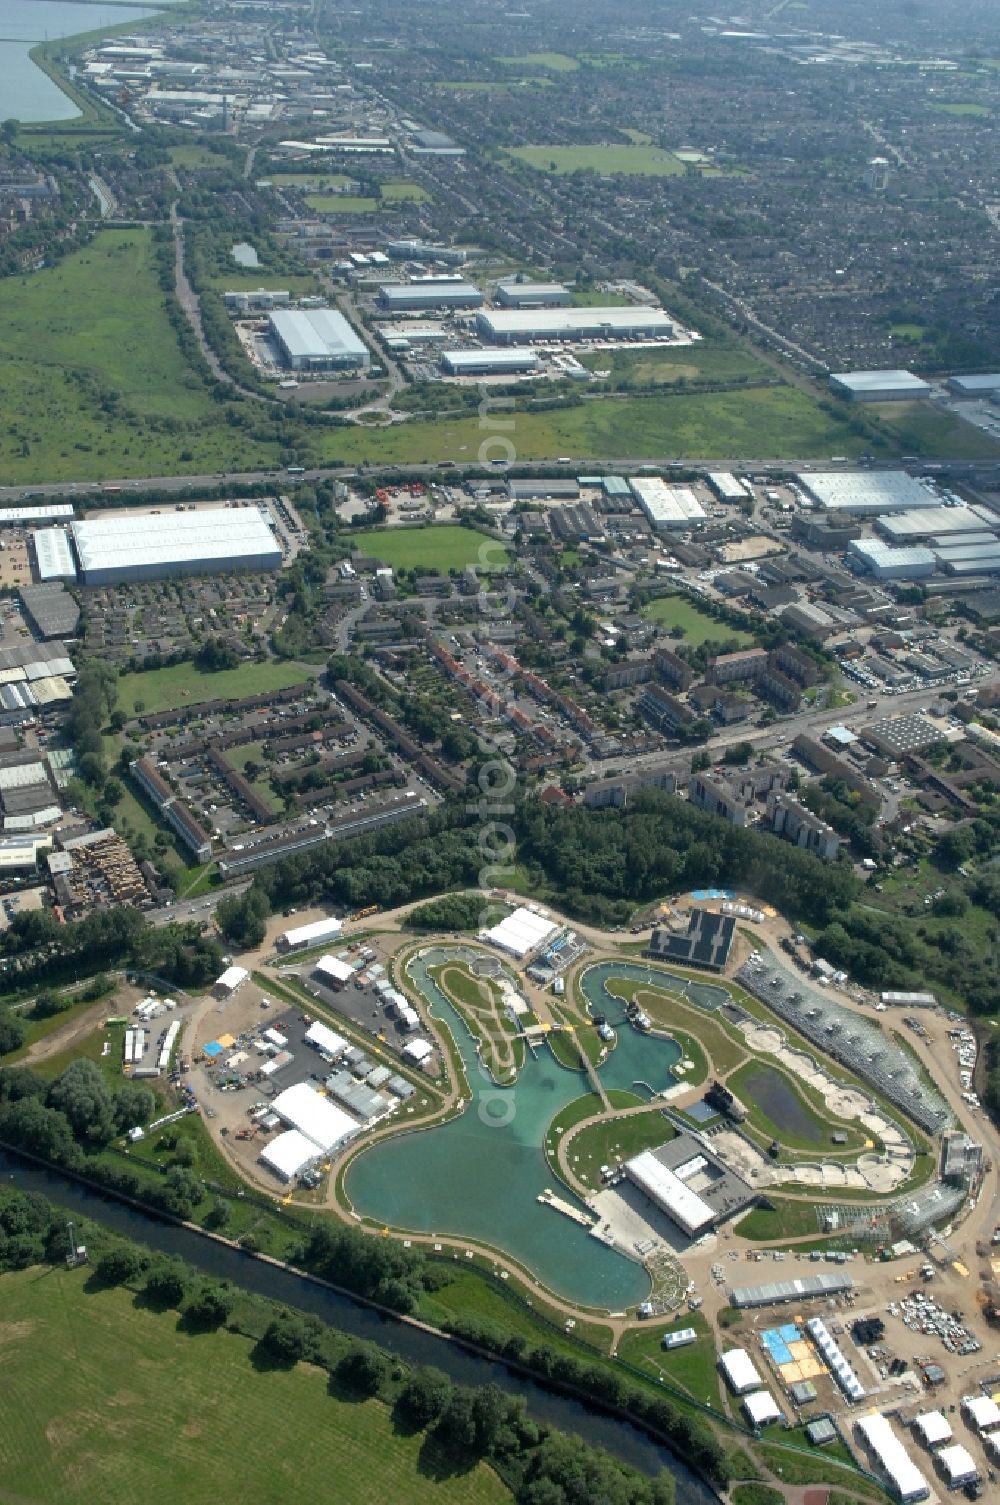 Aerial photograph Waltham Cross - The canoe slalom park Lee Valley White Water Centre is an Out-of-London venue and located near by Waltham Cross in Hertfordshire and one of the Olympic and Paralympic venues for the 2012 Games in Great Britain